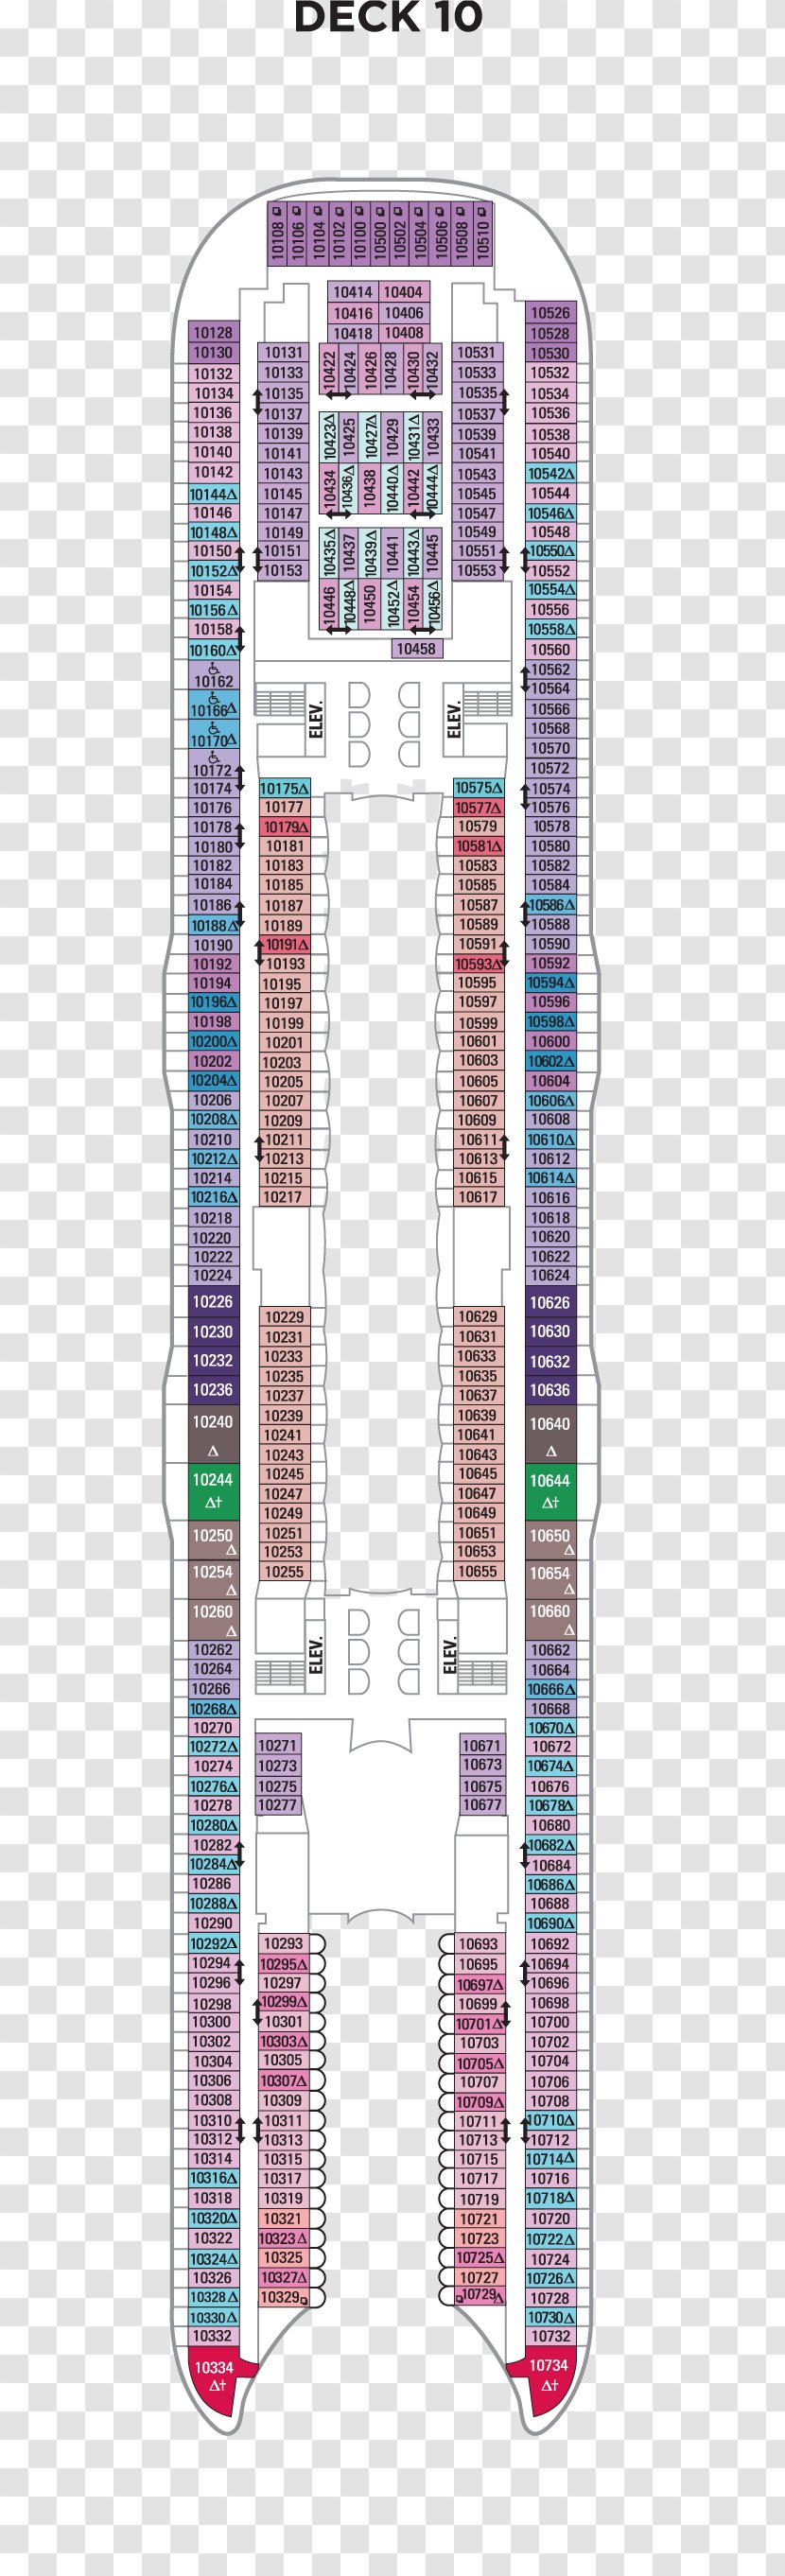 MS Symphony Of The Seas Cruise Ship Deck - Log Cabin Transparent PNG